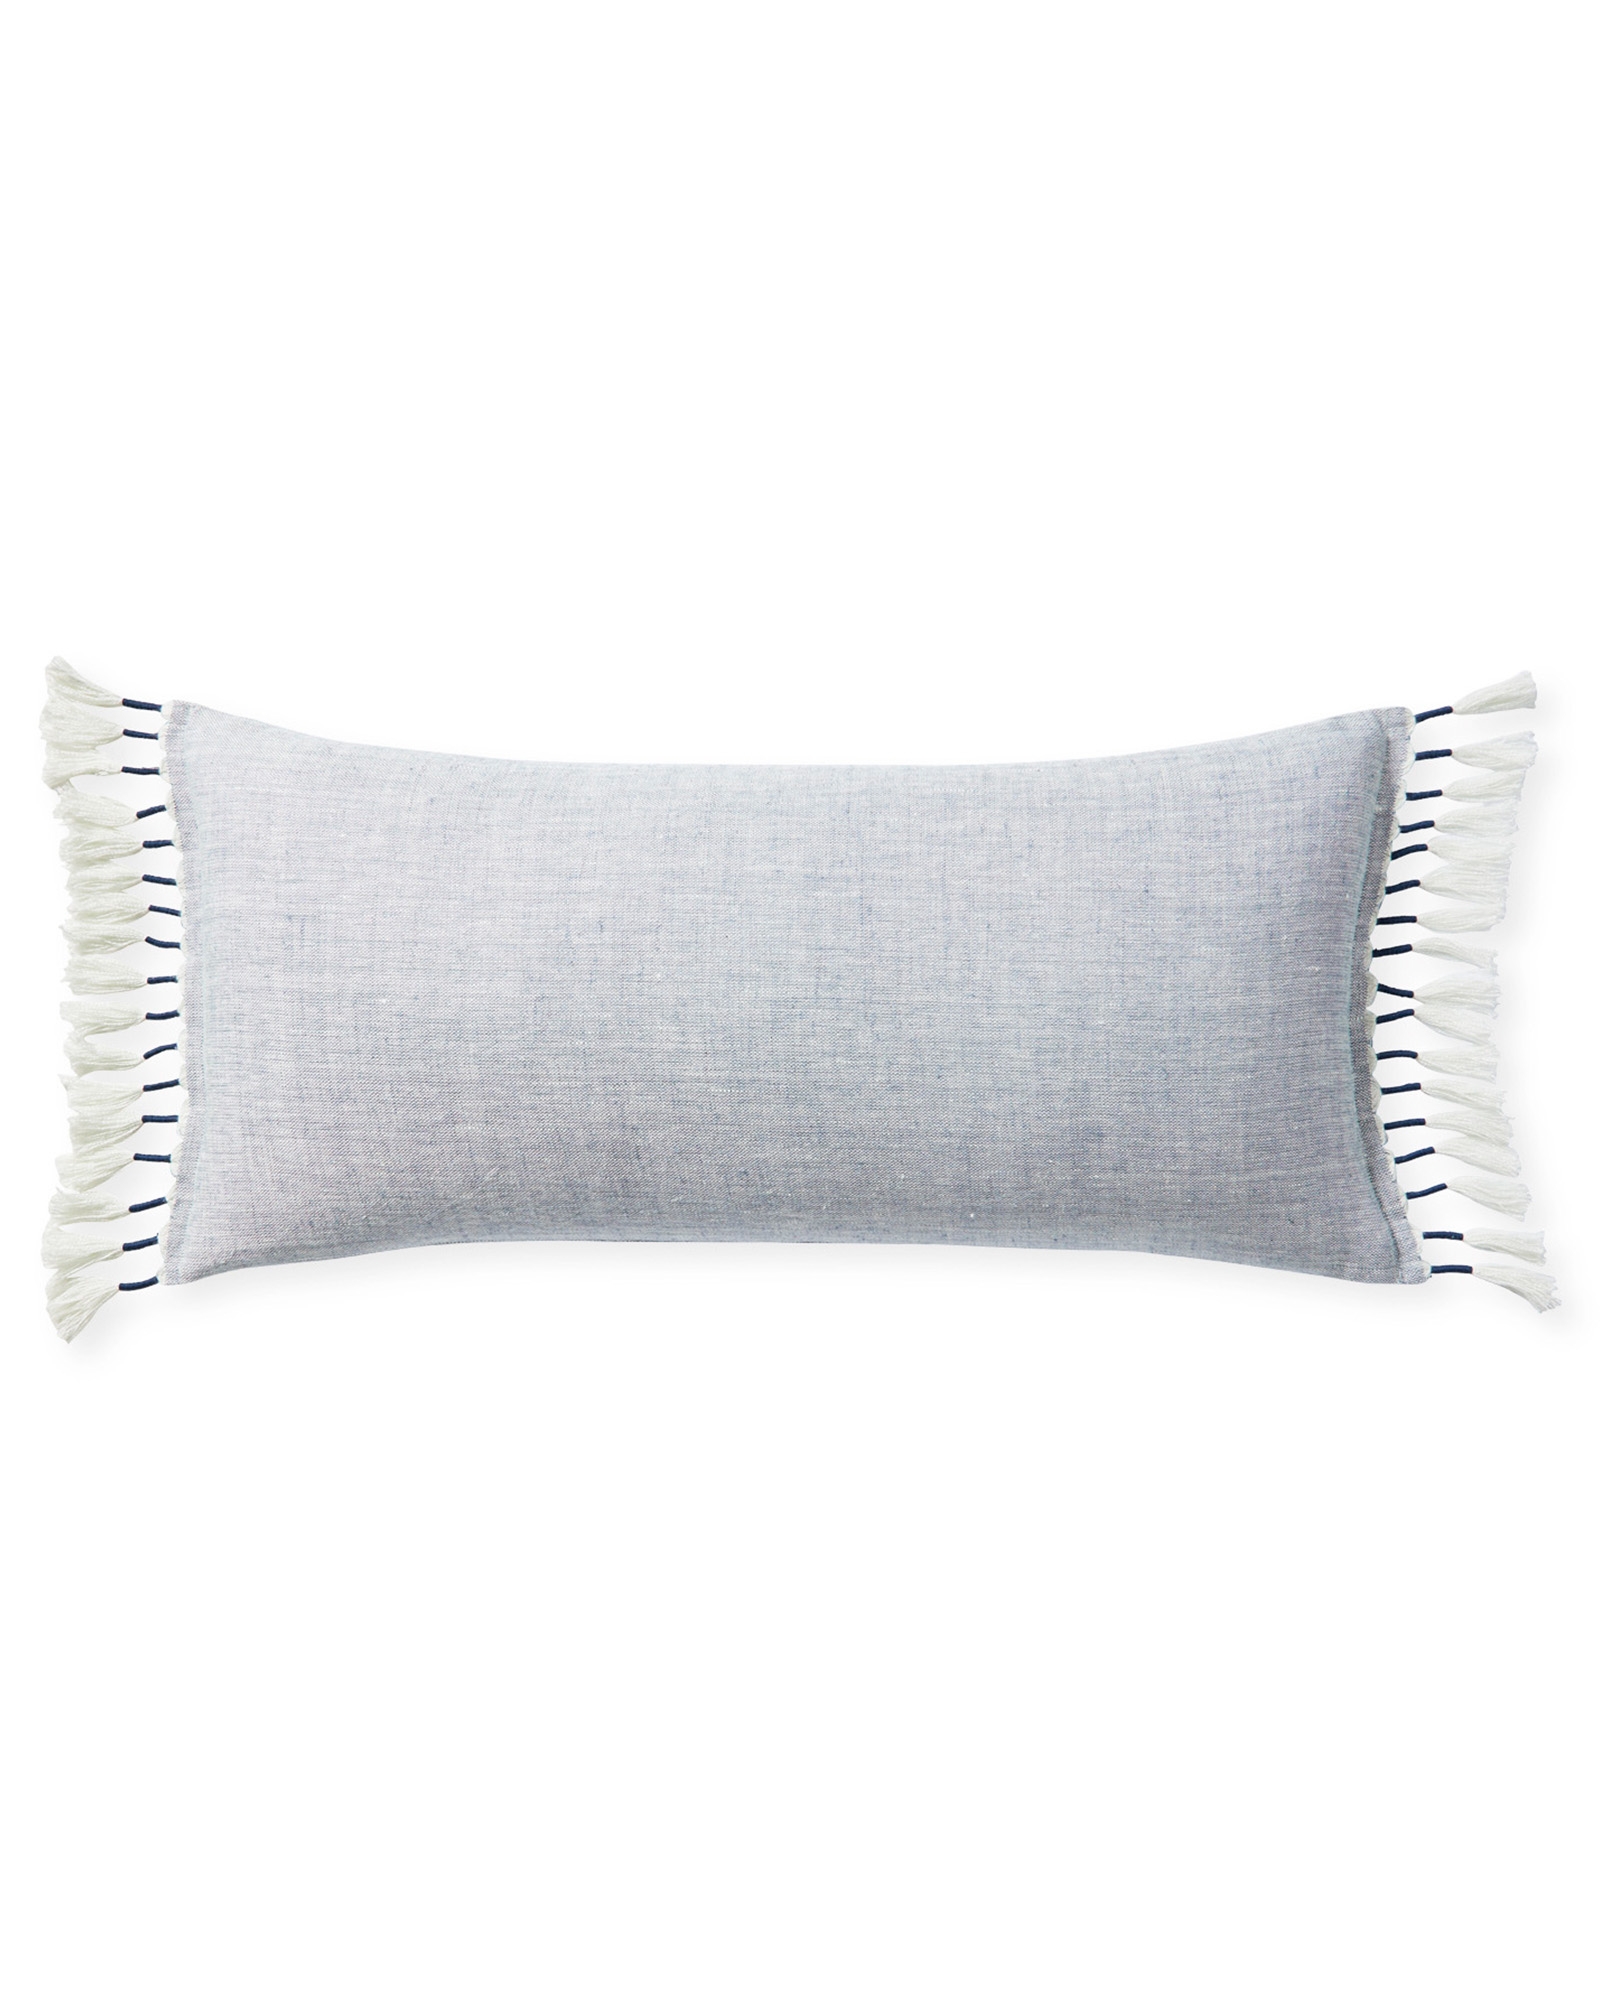 Topanga 14" x 30" Pillow Cover - Blue - Insert sold separately - Image 0